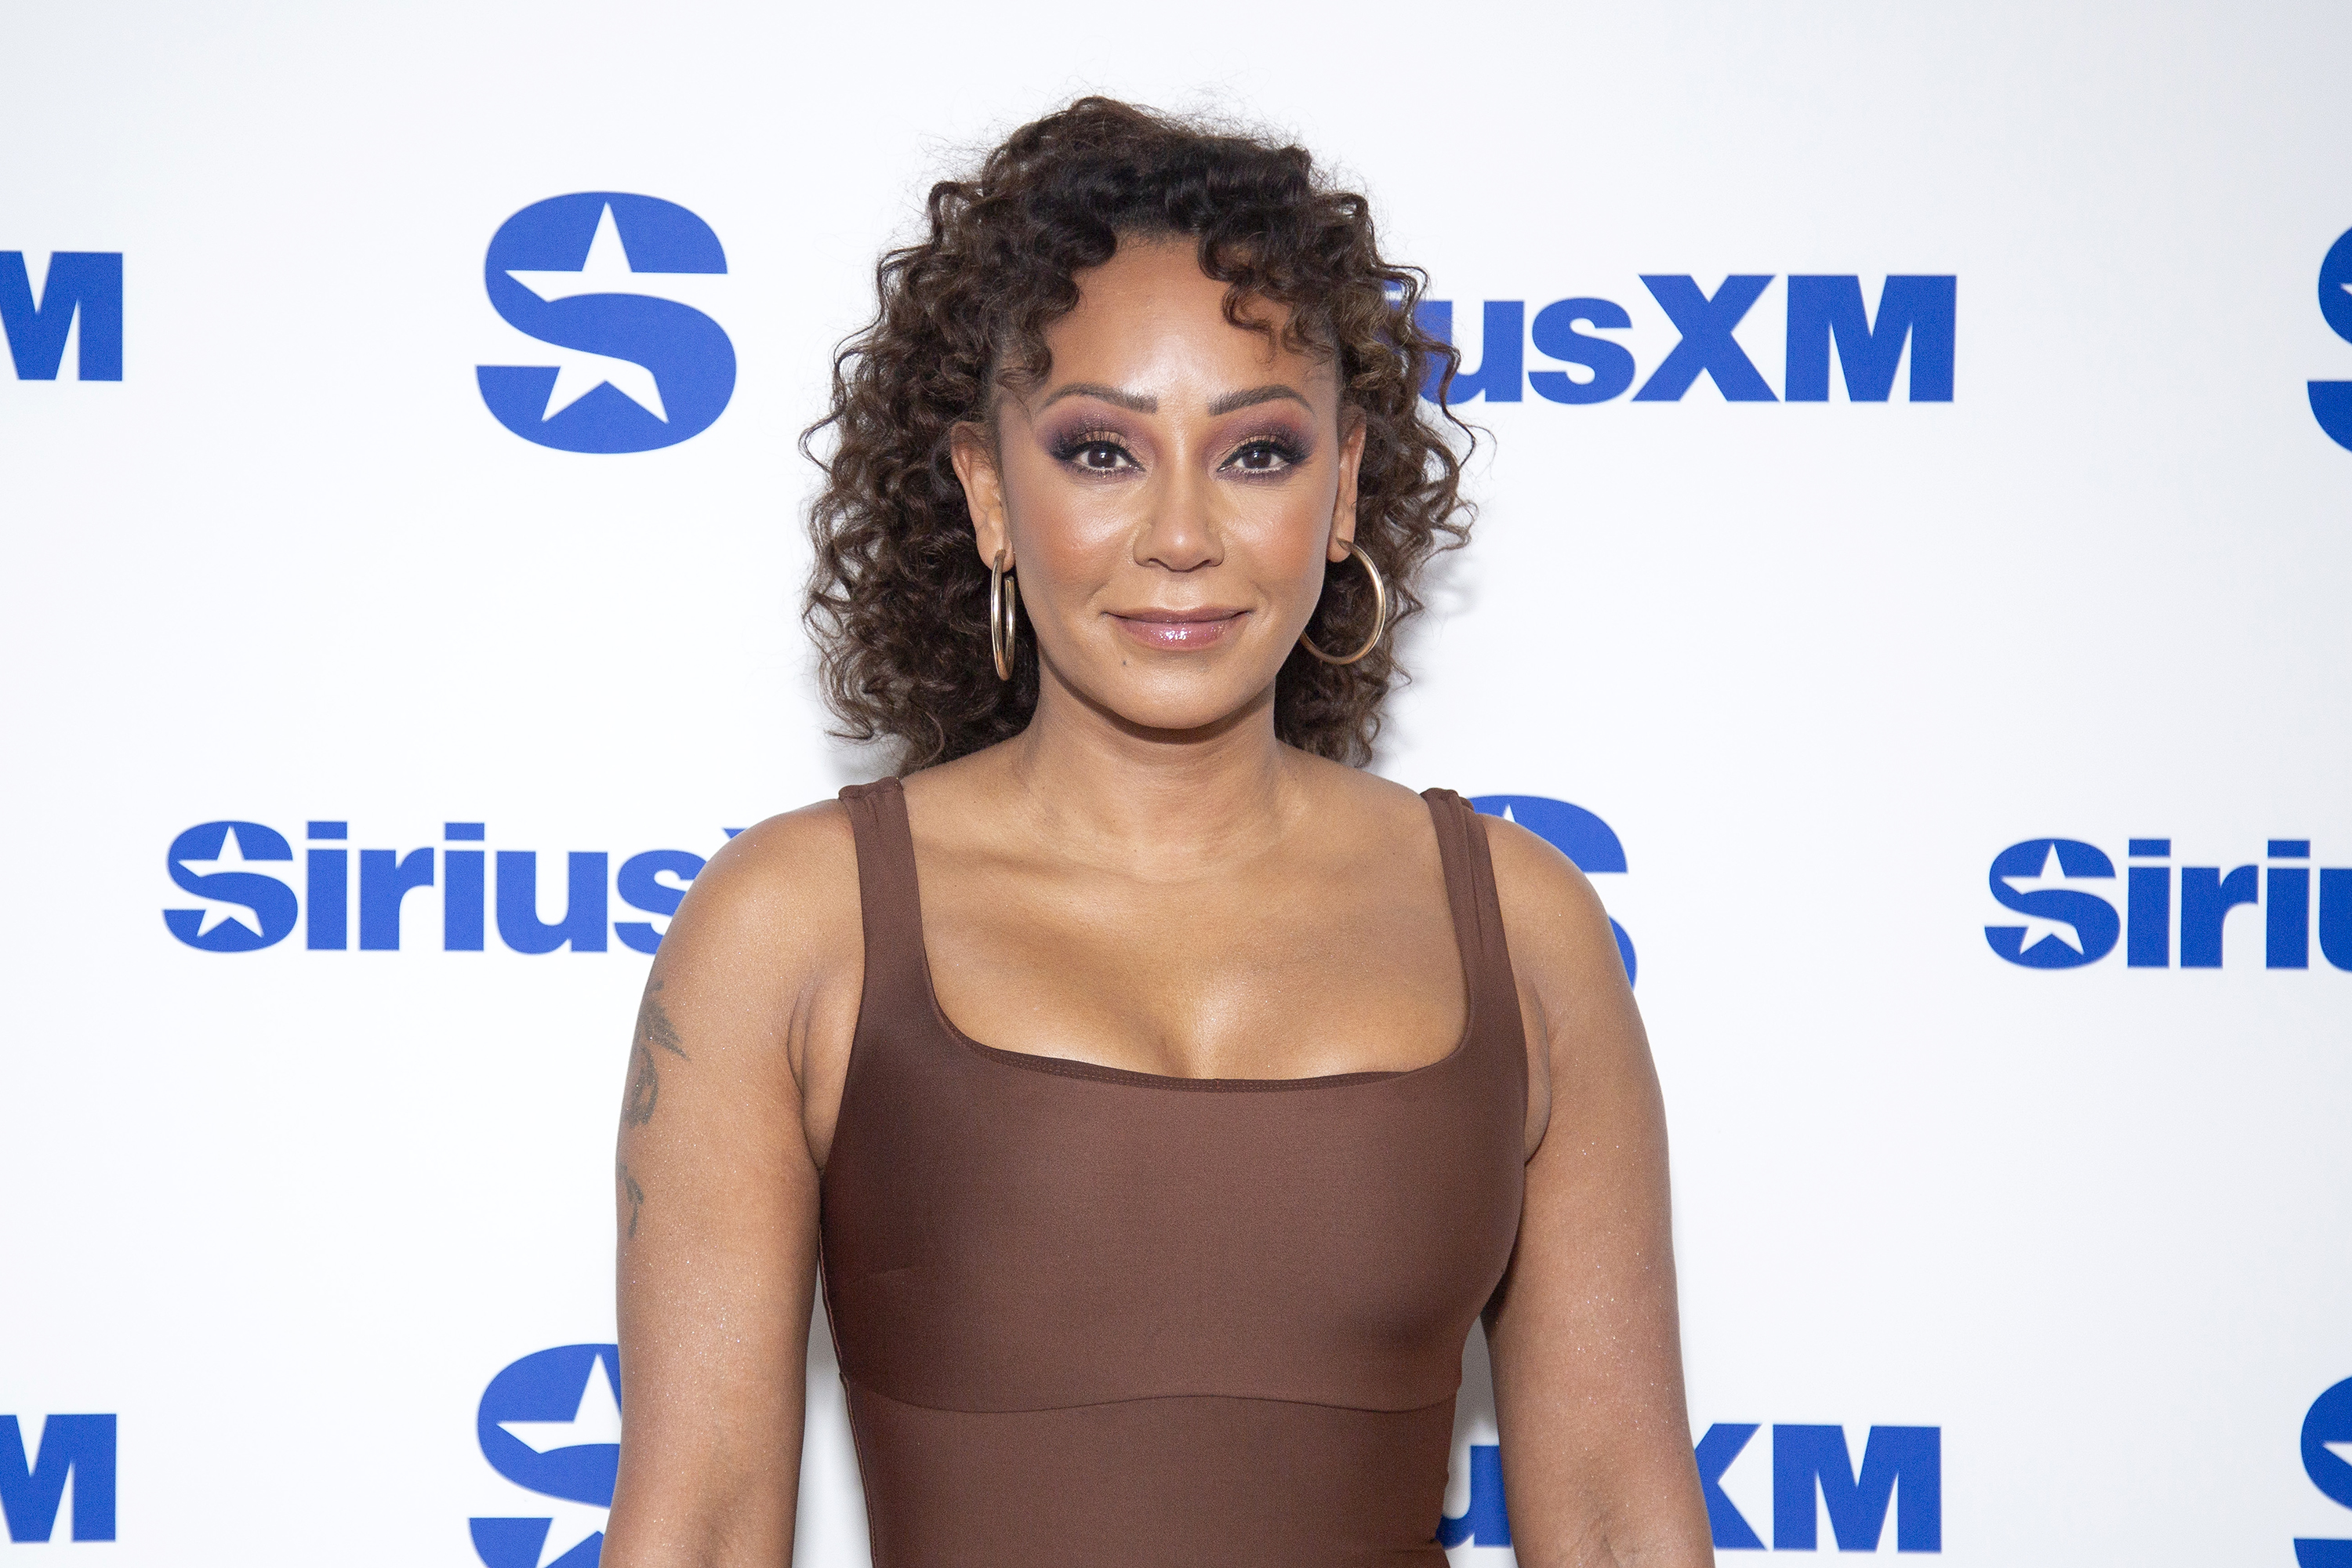 Mel B said the Spice Girls would 'take a bullet' for Geri